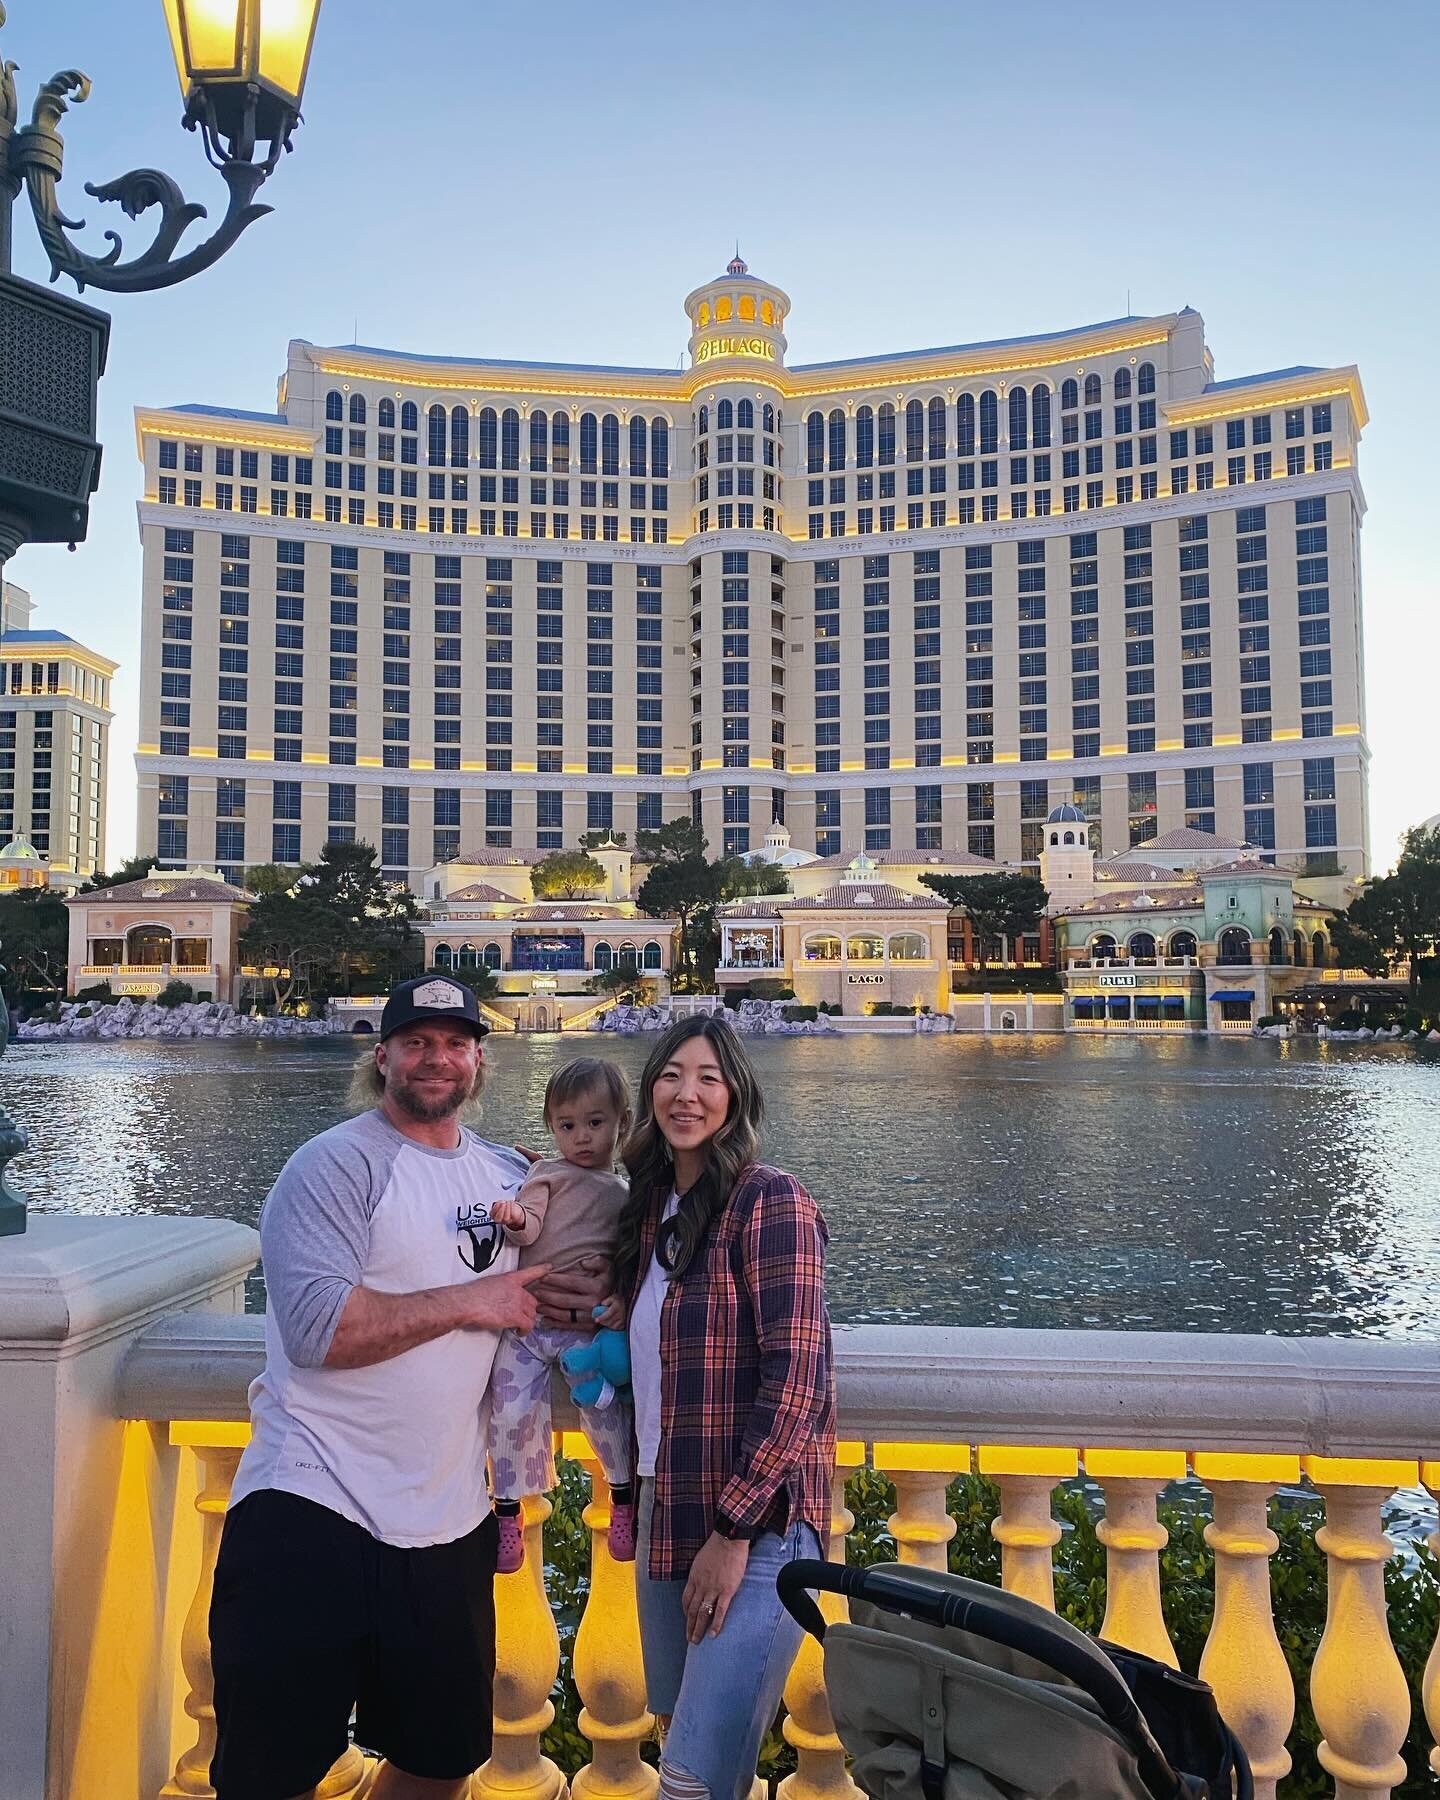 Aspen&rsquo;s Vegas vibe was everything.  We packed so much in 4 days!  2 aquariums, a pet comedy show, the Hoover Dam, Bobby Flay&rsquo;s restaurant Amalfi, $40 lobster rolls, the Bellagio fountain show, the Eiffel Tower, the Statue of Liberty, Cont